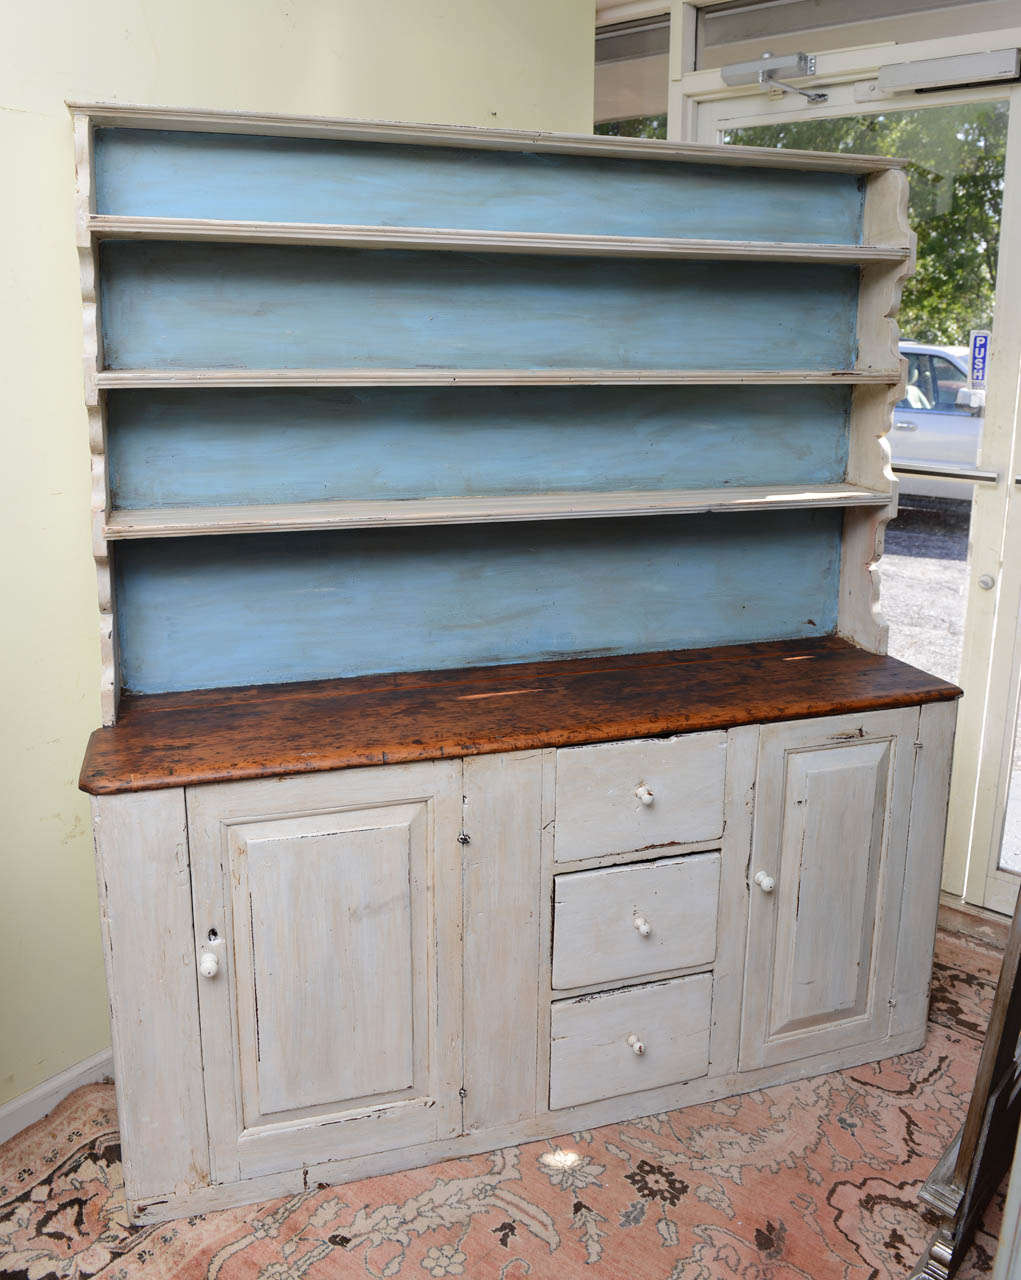 This is a very nice primitive solid pine welsh dresser some times called a pewter cupboard.  It has the original paint work maybe the blue in the back at a later time could have been added.  The drawer linings are solid wood with a little wear, I